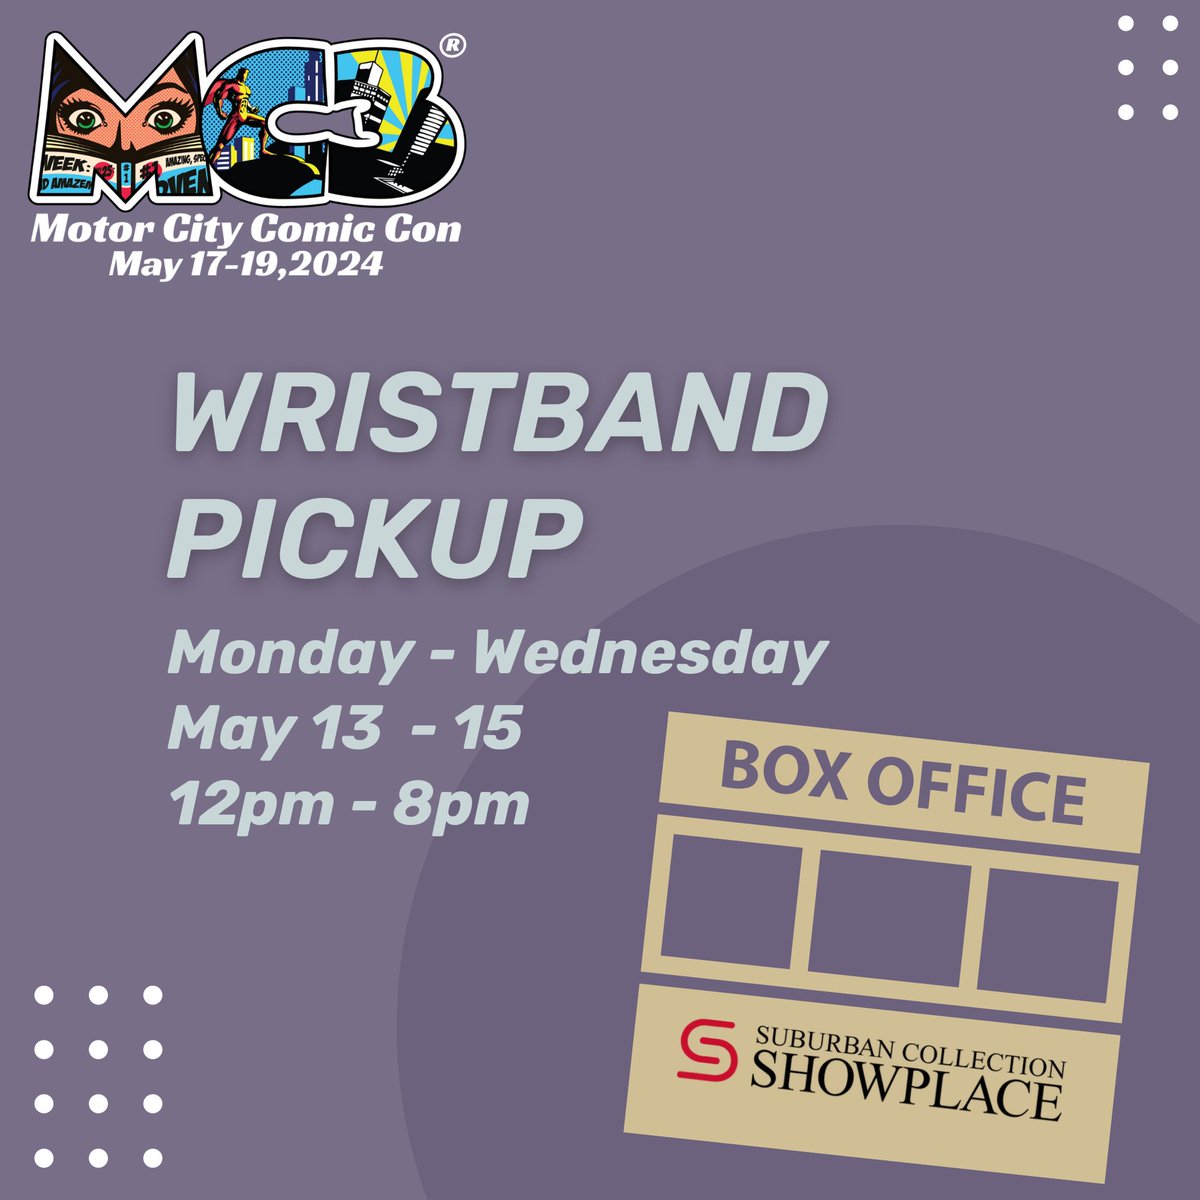 💥Wristband pickup starts today! Monday-Wednesday May 13-15 pick up your wristbands at the Suburban Collection Showplace Box Office. Staff will be available from 12-8pm. 🎟Tickets and details at motorcitycomiccon.com